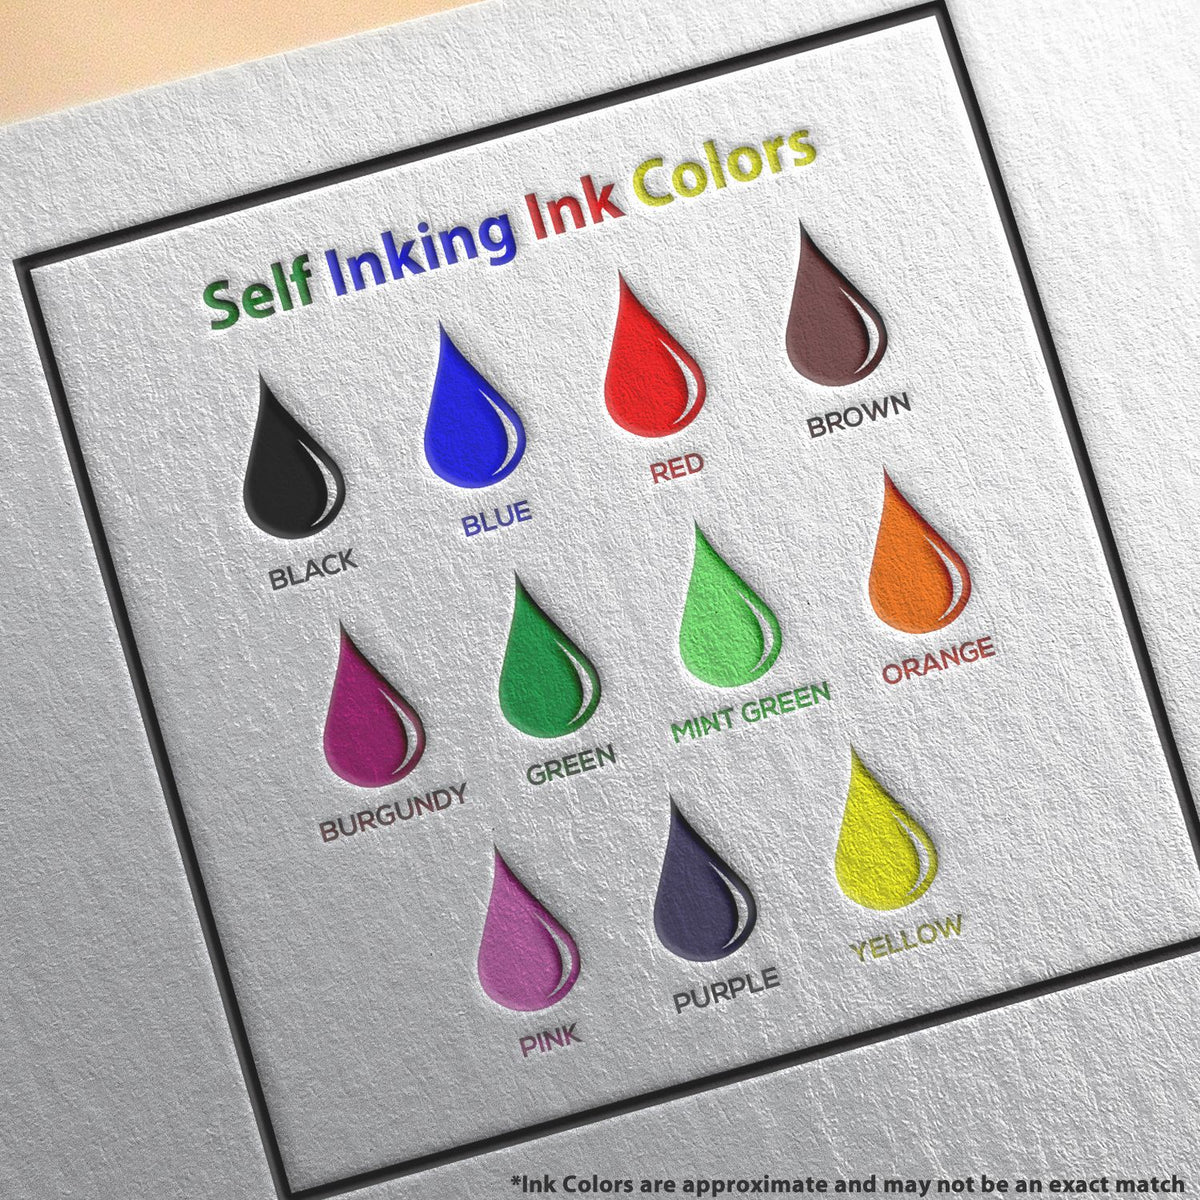 A picture showing the different ink colors or hues available for the Self-Inking Rhode Island Landscape Architect Stamp product.